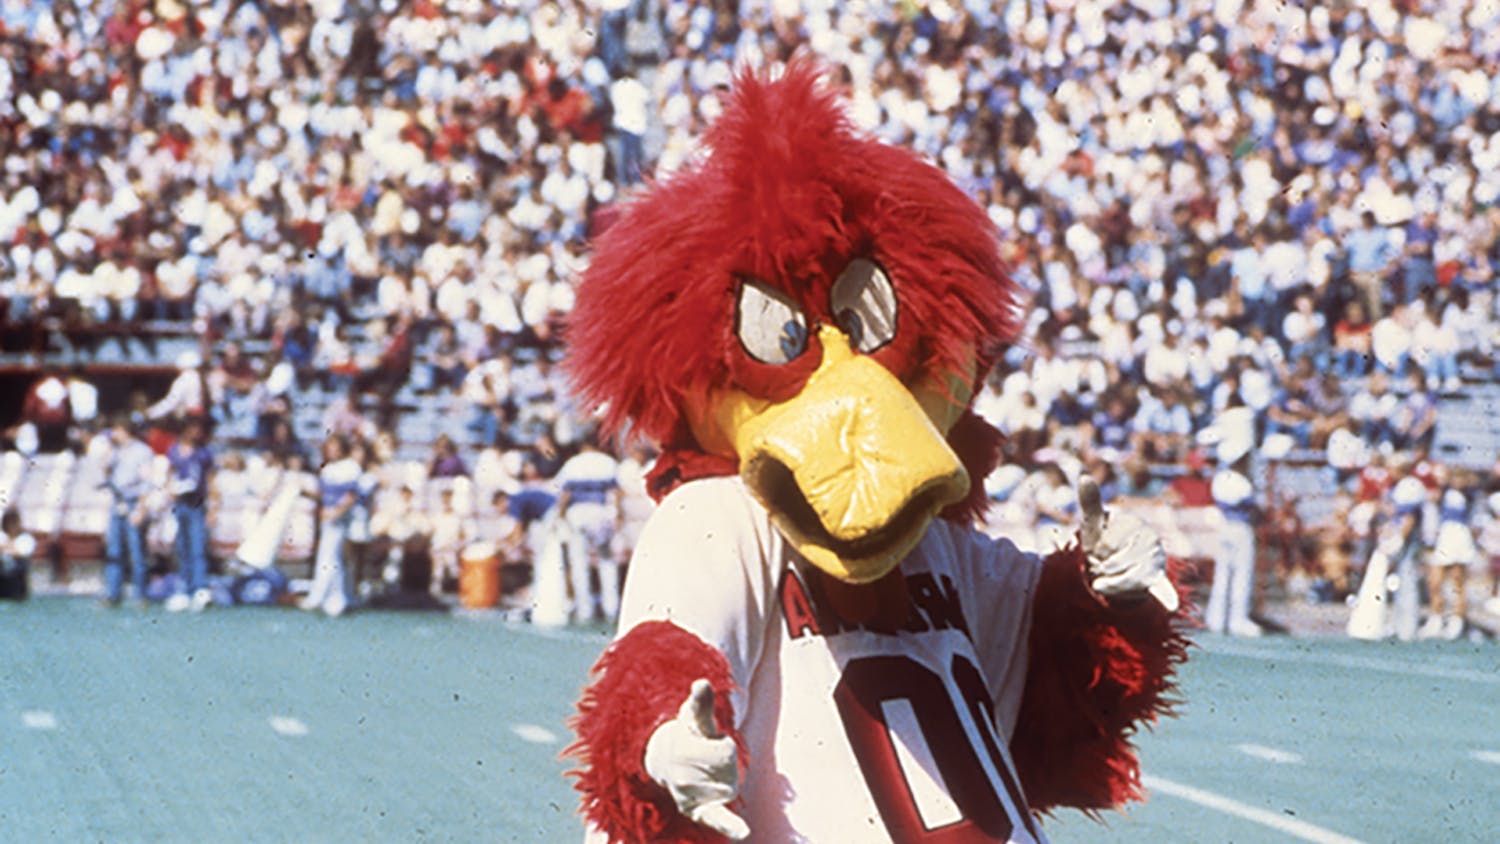 The mascot Cocky on the football field in the 1980s.